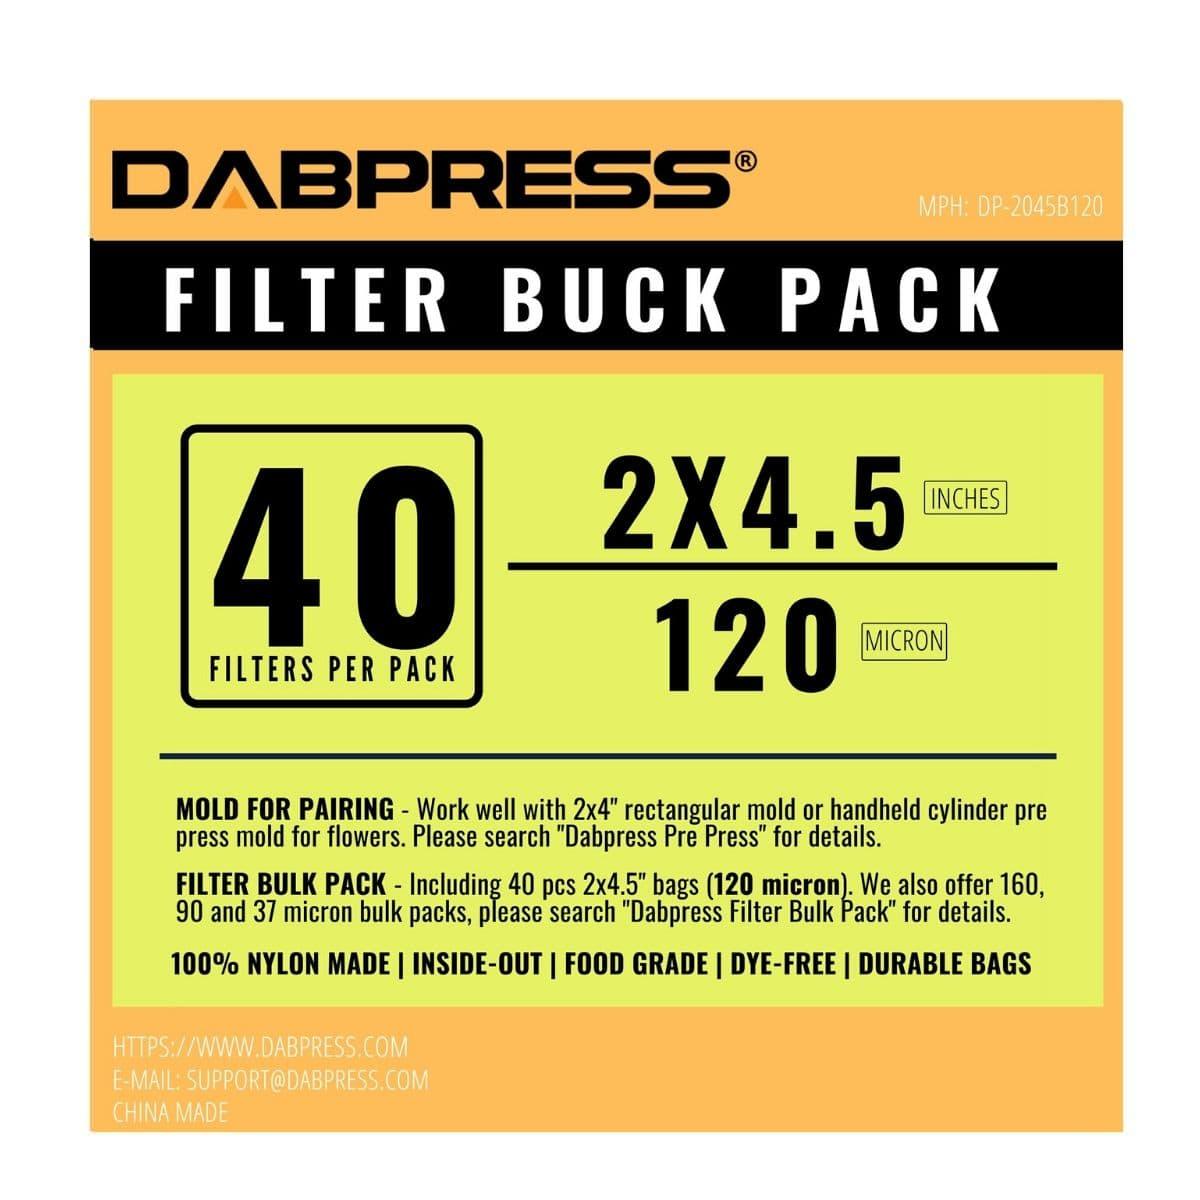 Dabpress Rosin Press Bags - 2x4 Nylon Screen Mesh Bags from 37,90,120 and 160 Micron for Extraction - ROSITEK